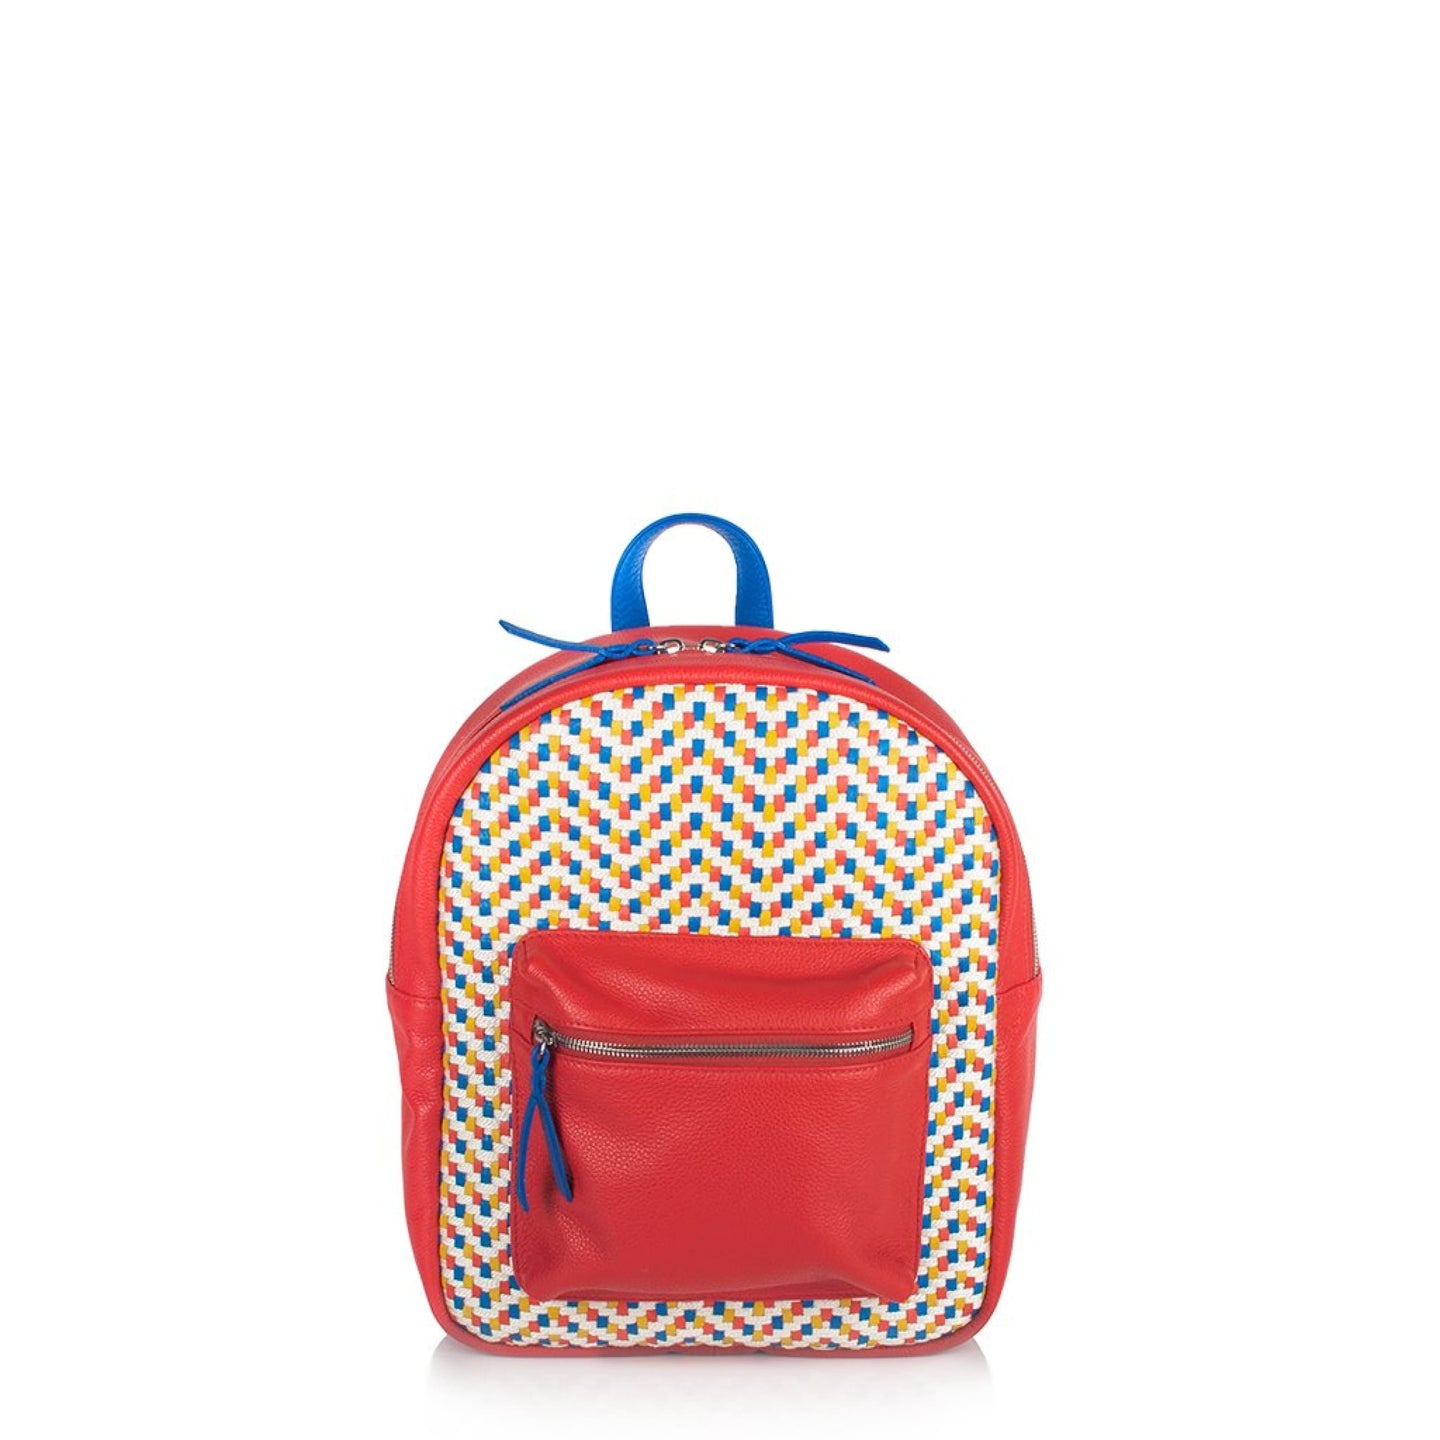 Mini Backpack - Red with Royal Blue Trim (Kids Backpack) - Backpack Made in USA | Made By Alex